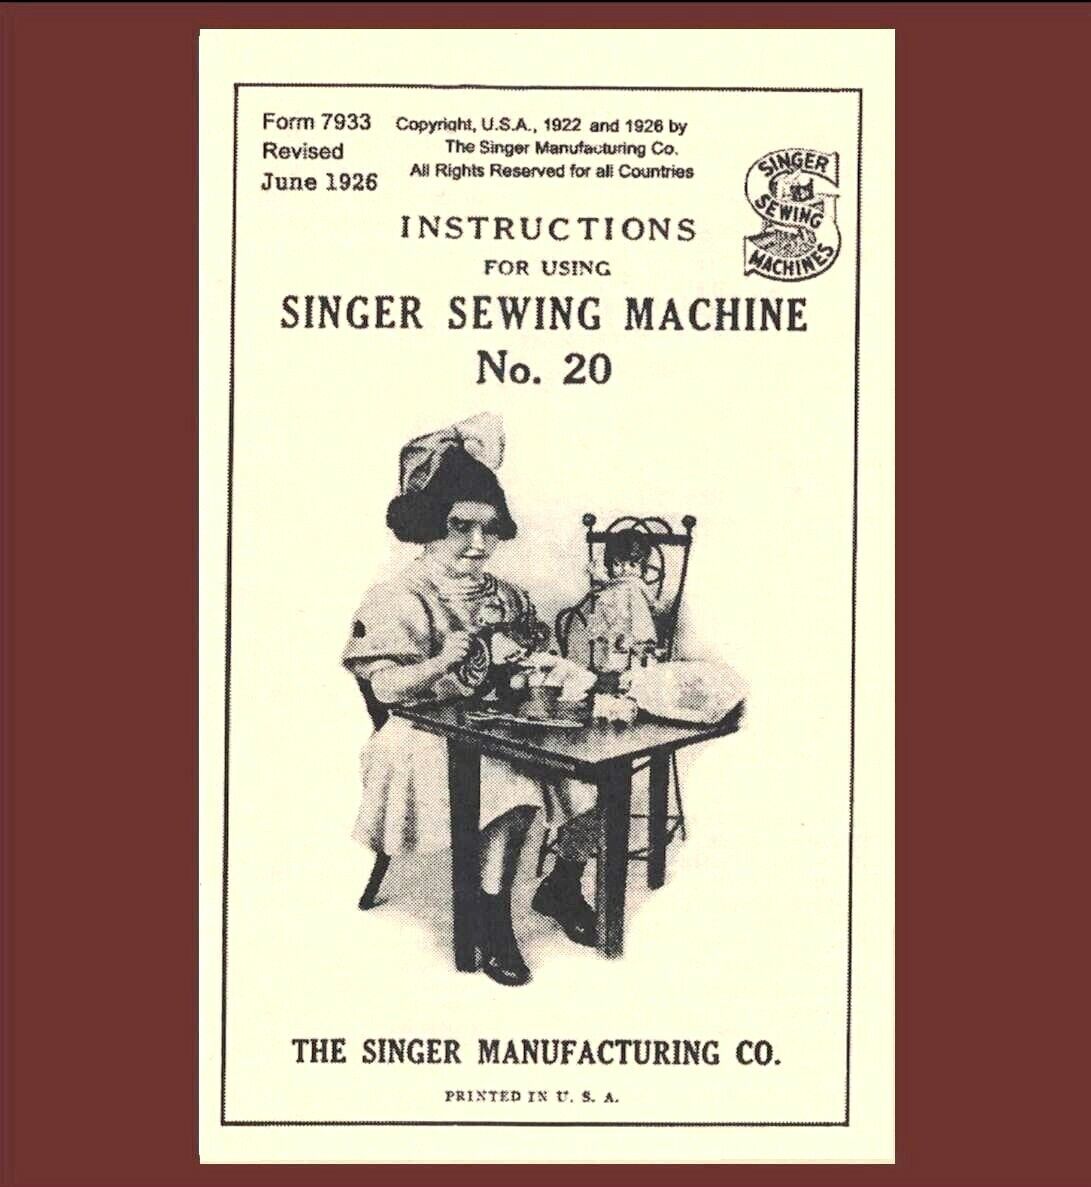 Singer 20 toy child sewing machine MANUAL INSTRUCTIONS (1926)